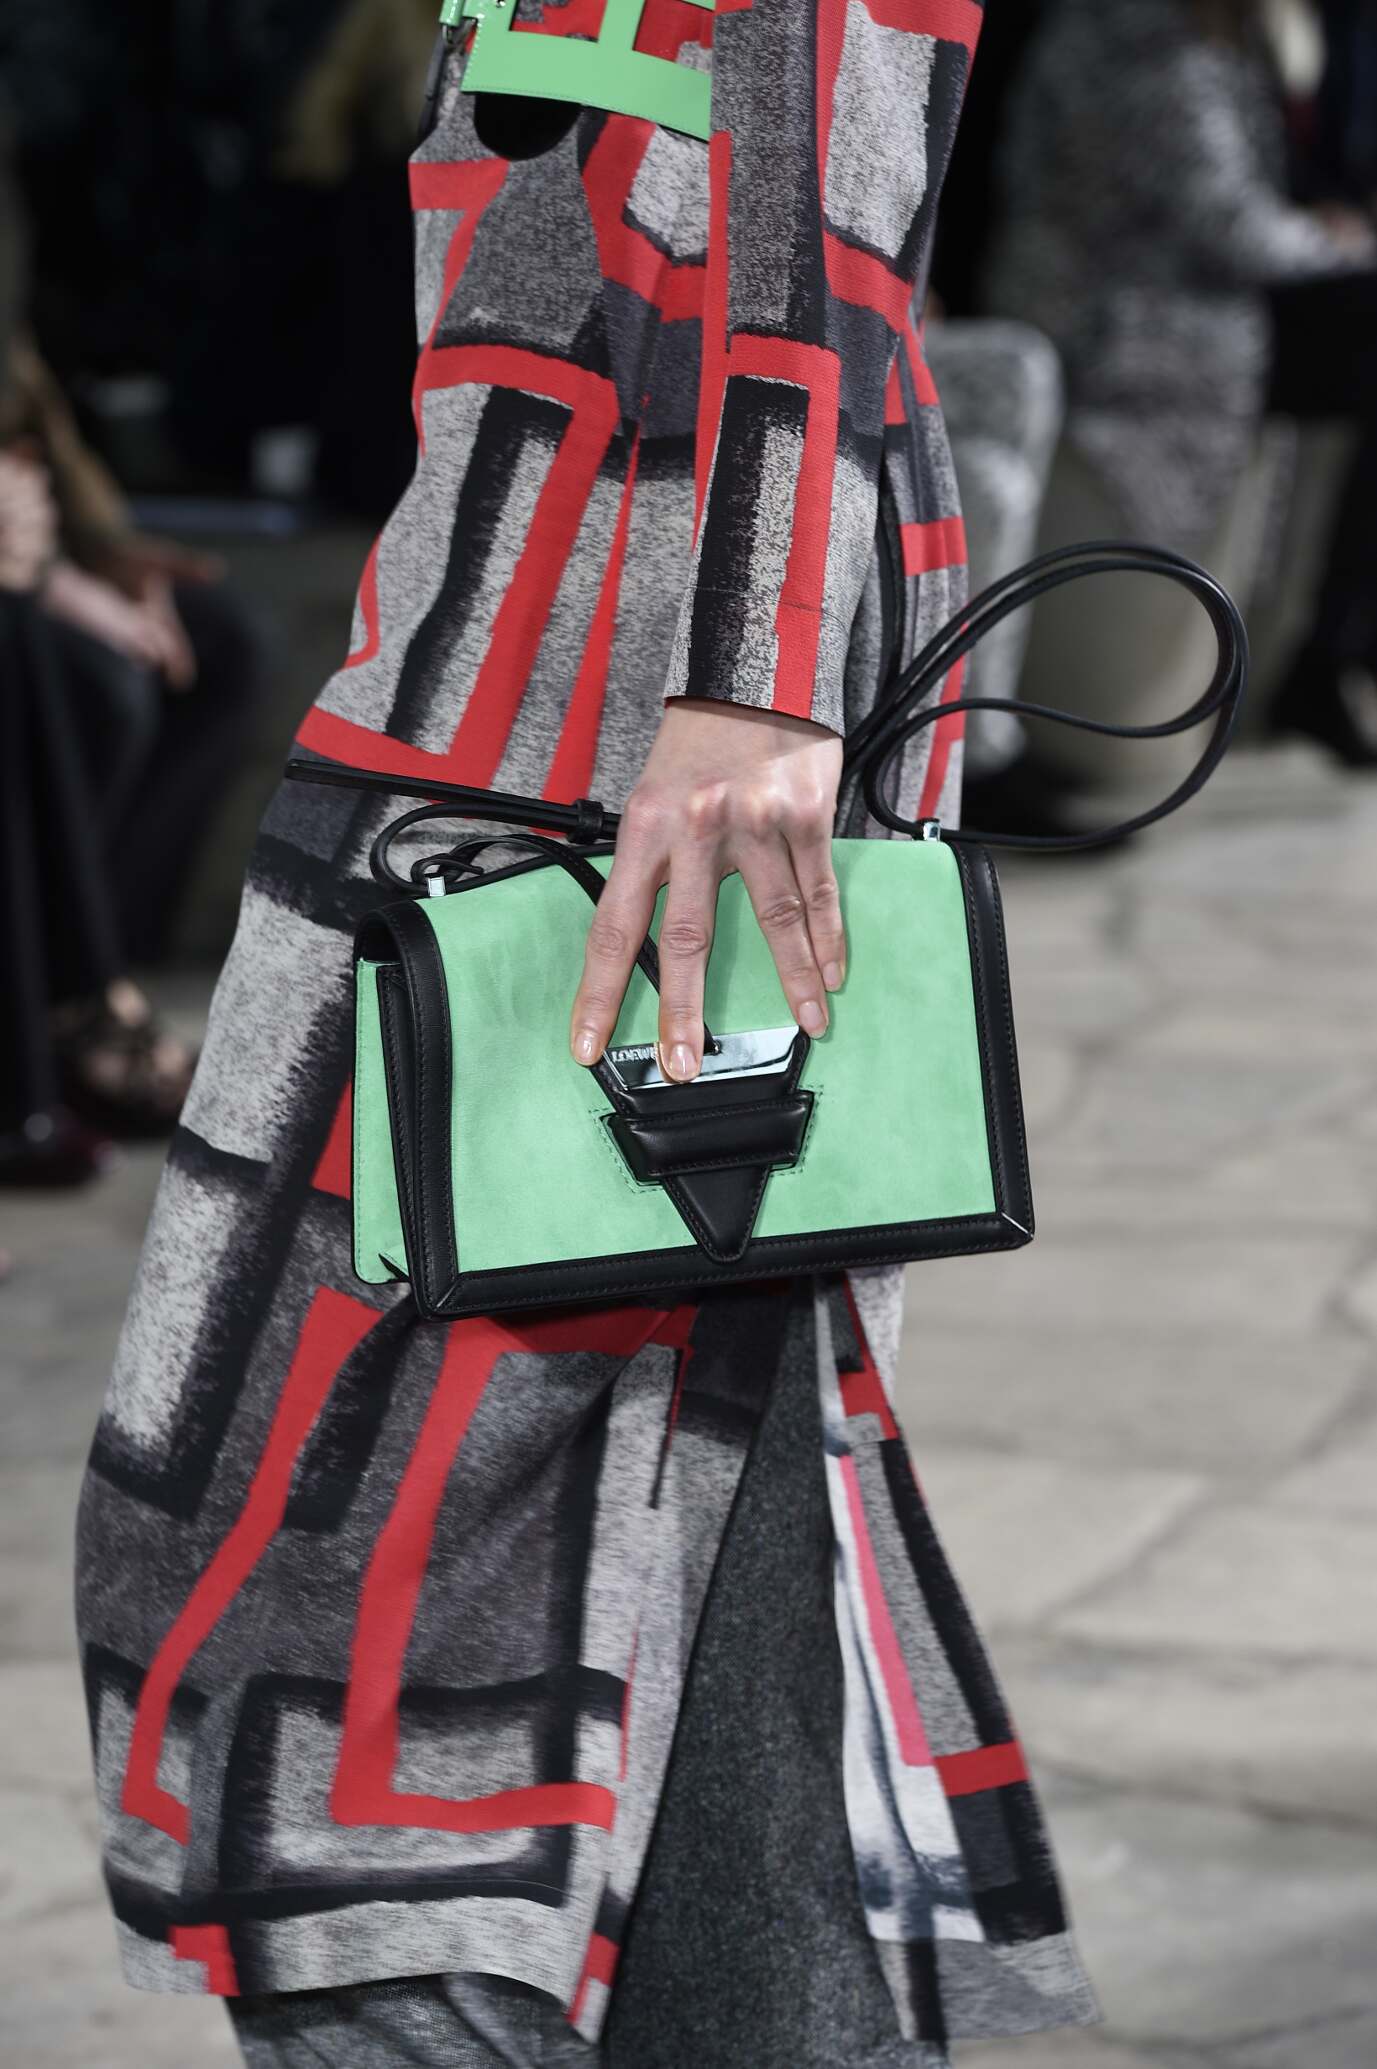 LOEWE FW 2015-16 WOMEN’S COLLECTION DETAILS | The Skinny Beep